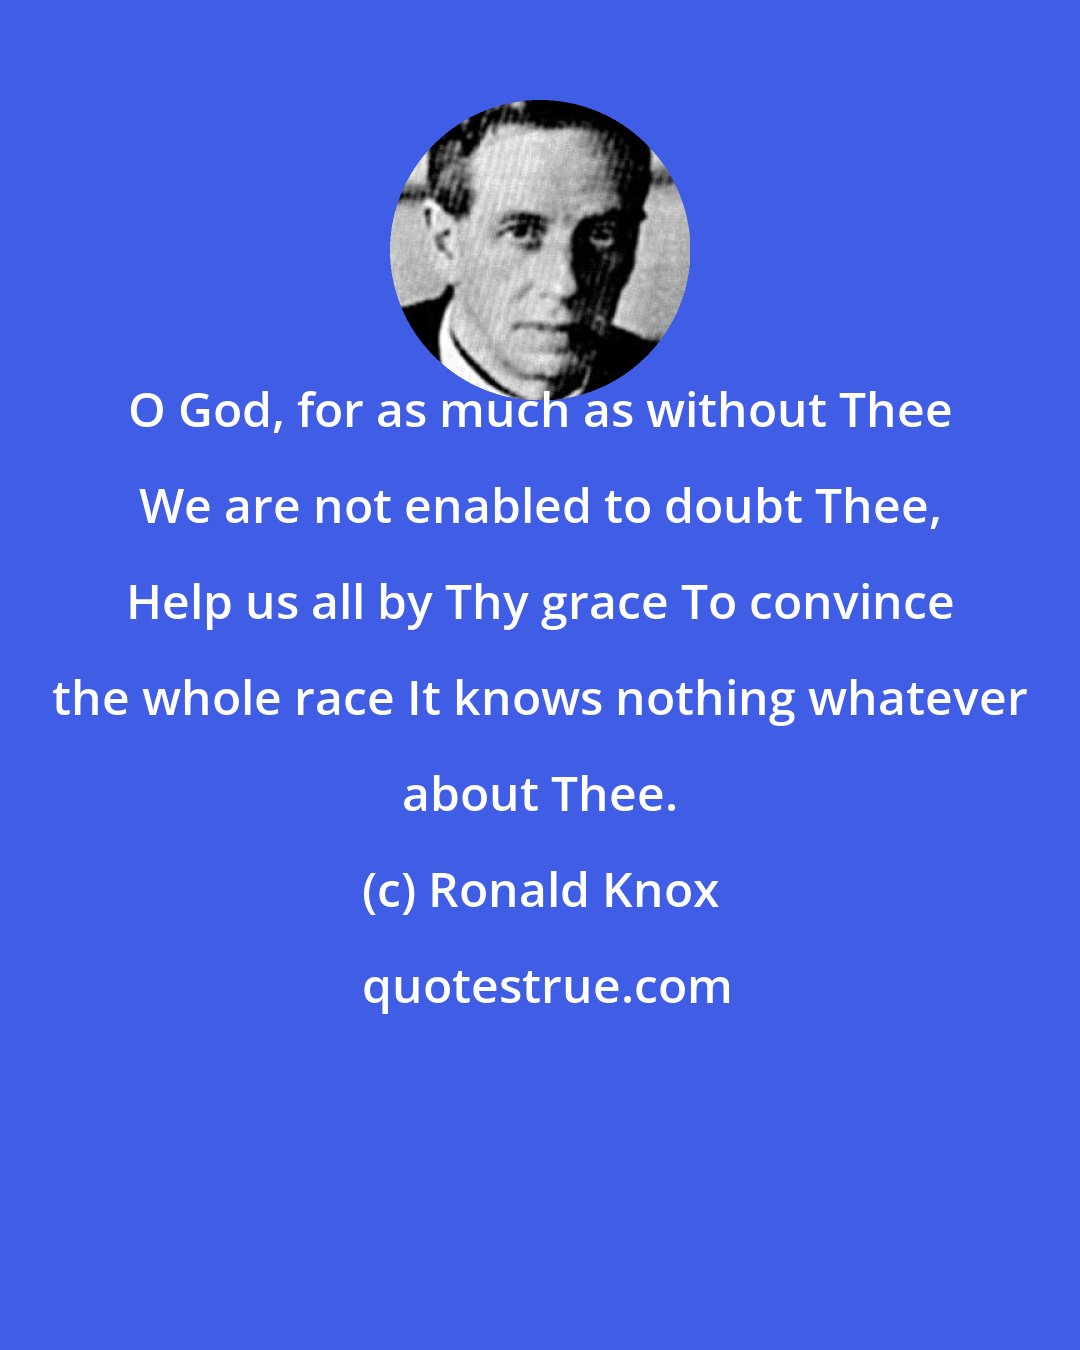 Ronald Knox: O God, for as much as without Thee We are not enabled to doubt Thee, Help us all by Thy grace To convince the whole race It knows nothing whatever about Thee.